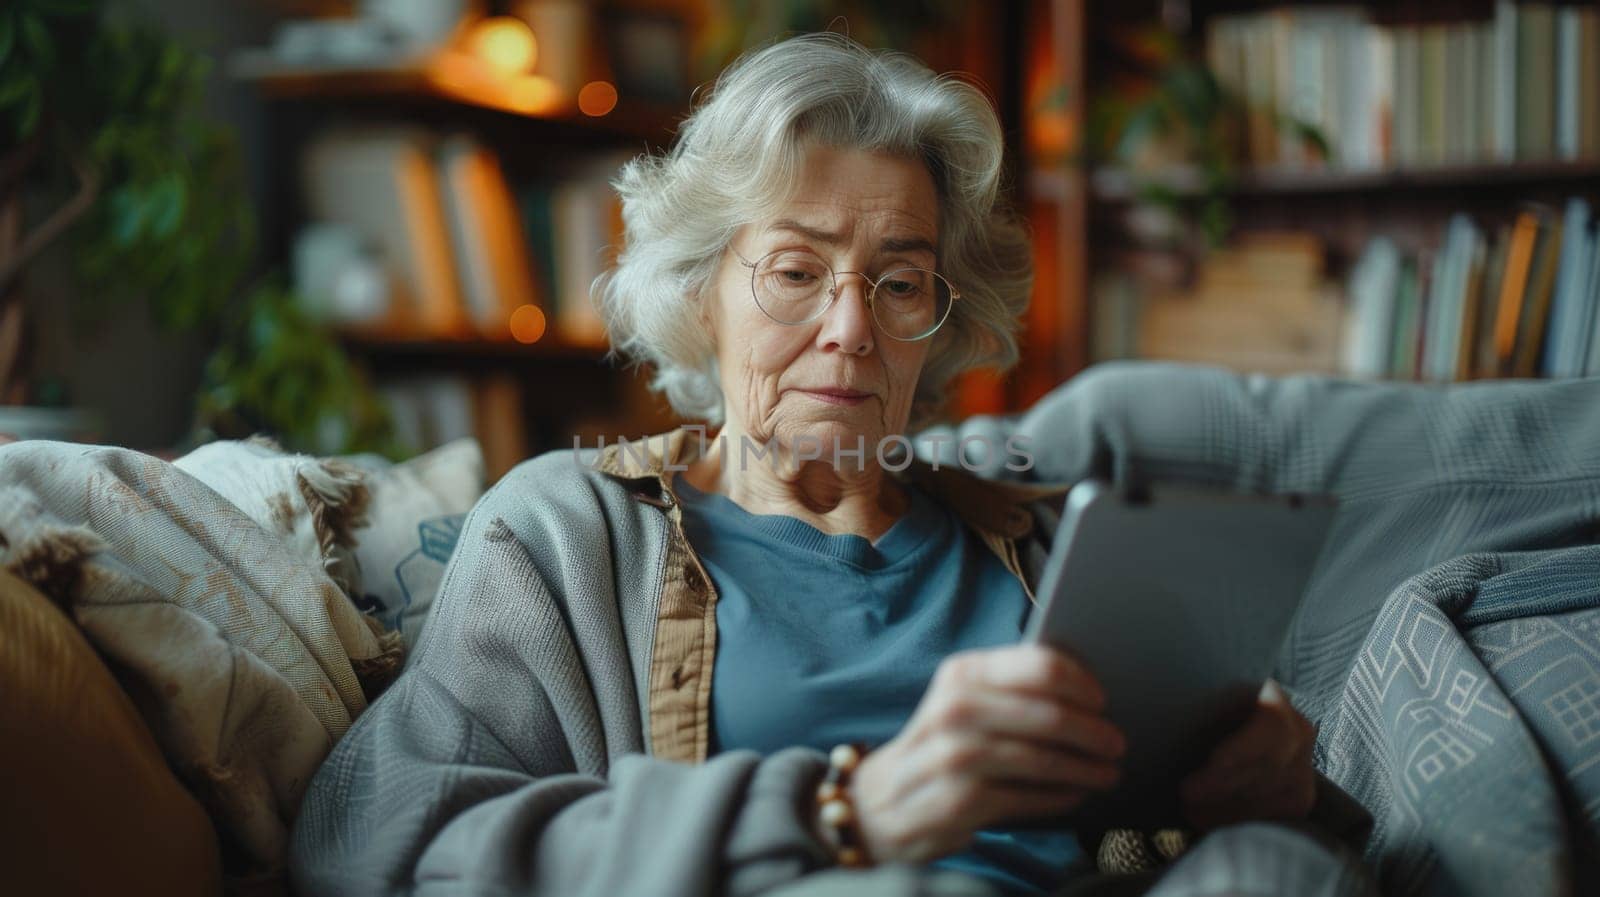 An elderly woman seated on a couch, engaged with a tablet and interacting with content.